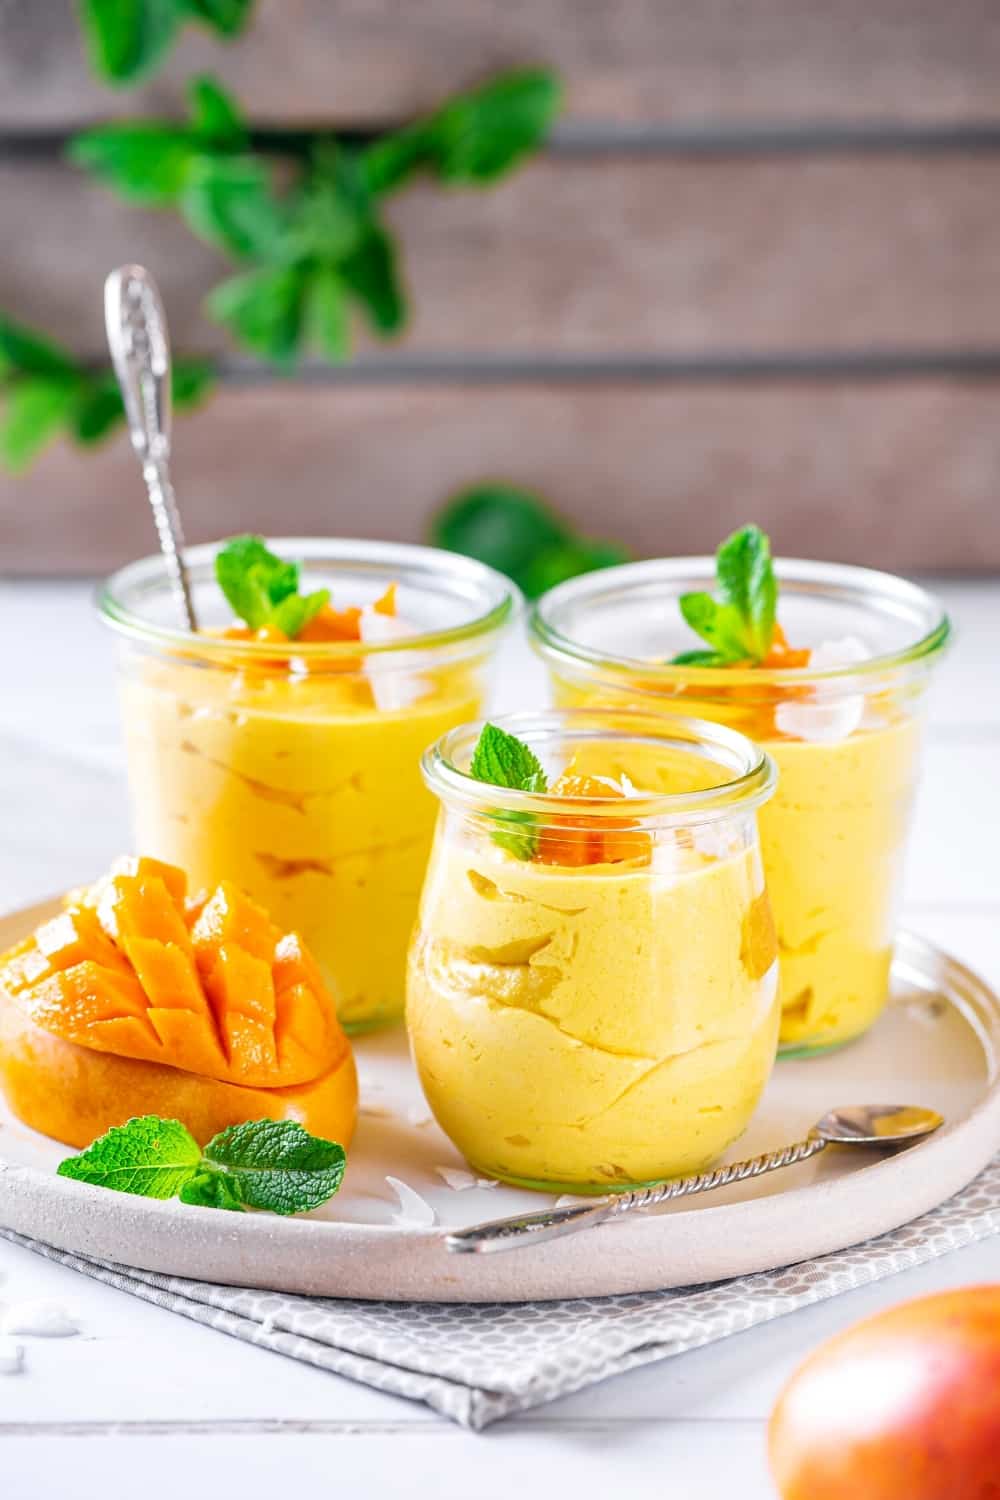 3 glass cups of mango mousse on a white plate. There is a sliced mango to the left of the cups on the plate.